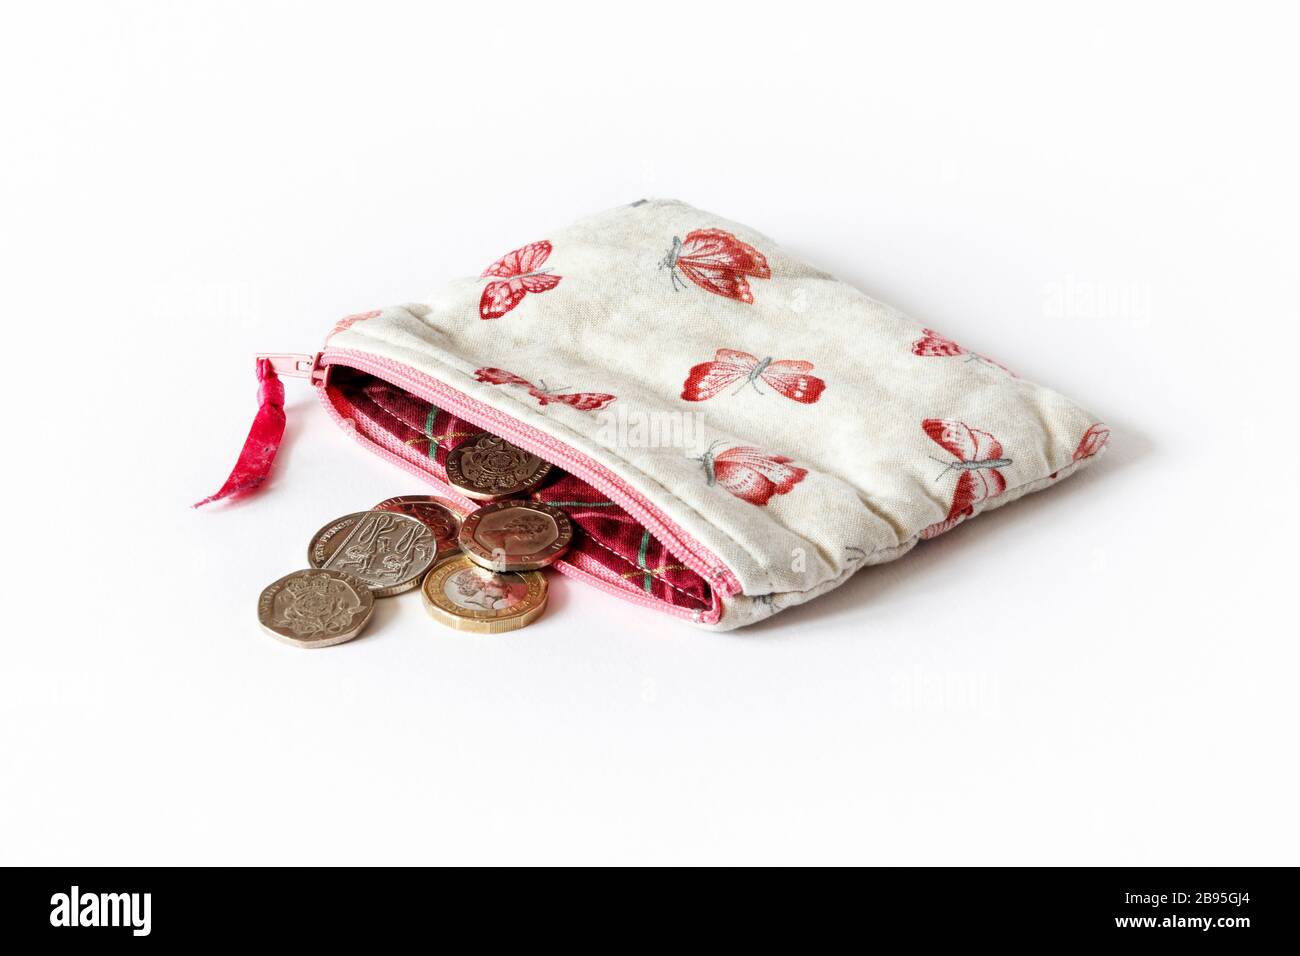 An open hand-made zip-up pink butterfly-patterned fabric purse with British coins Stock Photo